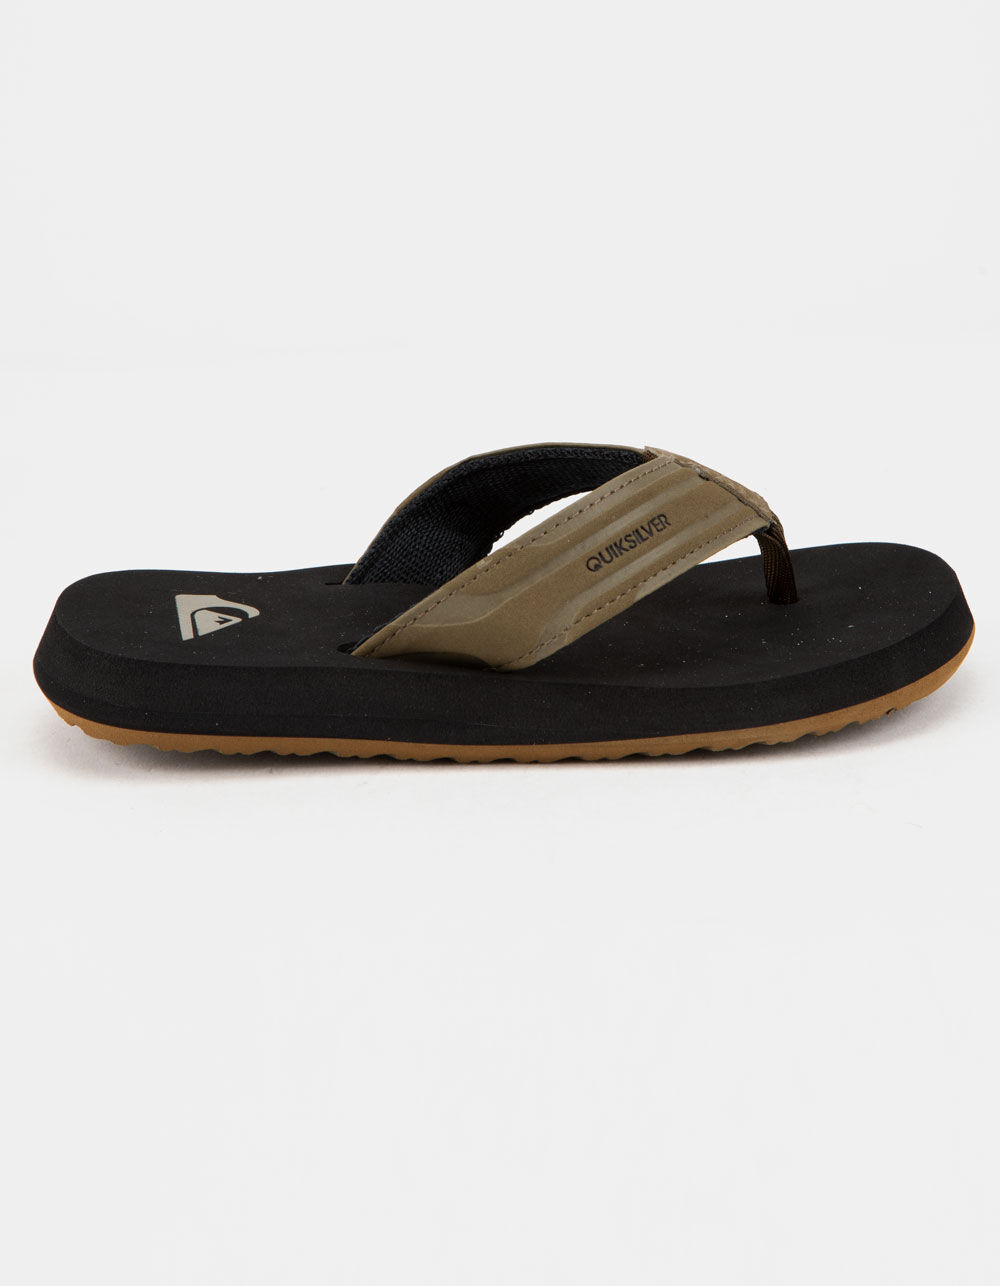 QUIKSILVER Monkey Wrench Tan Boys Sandals image number 2